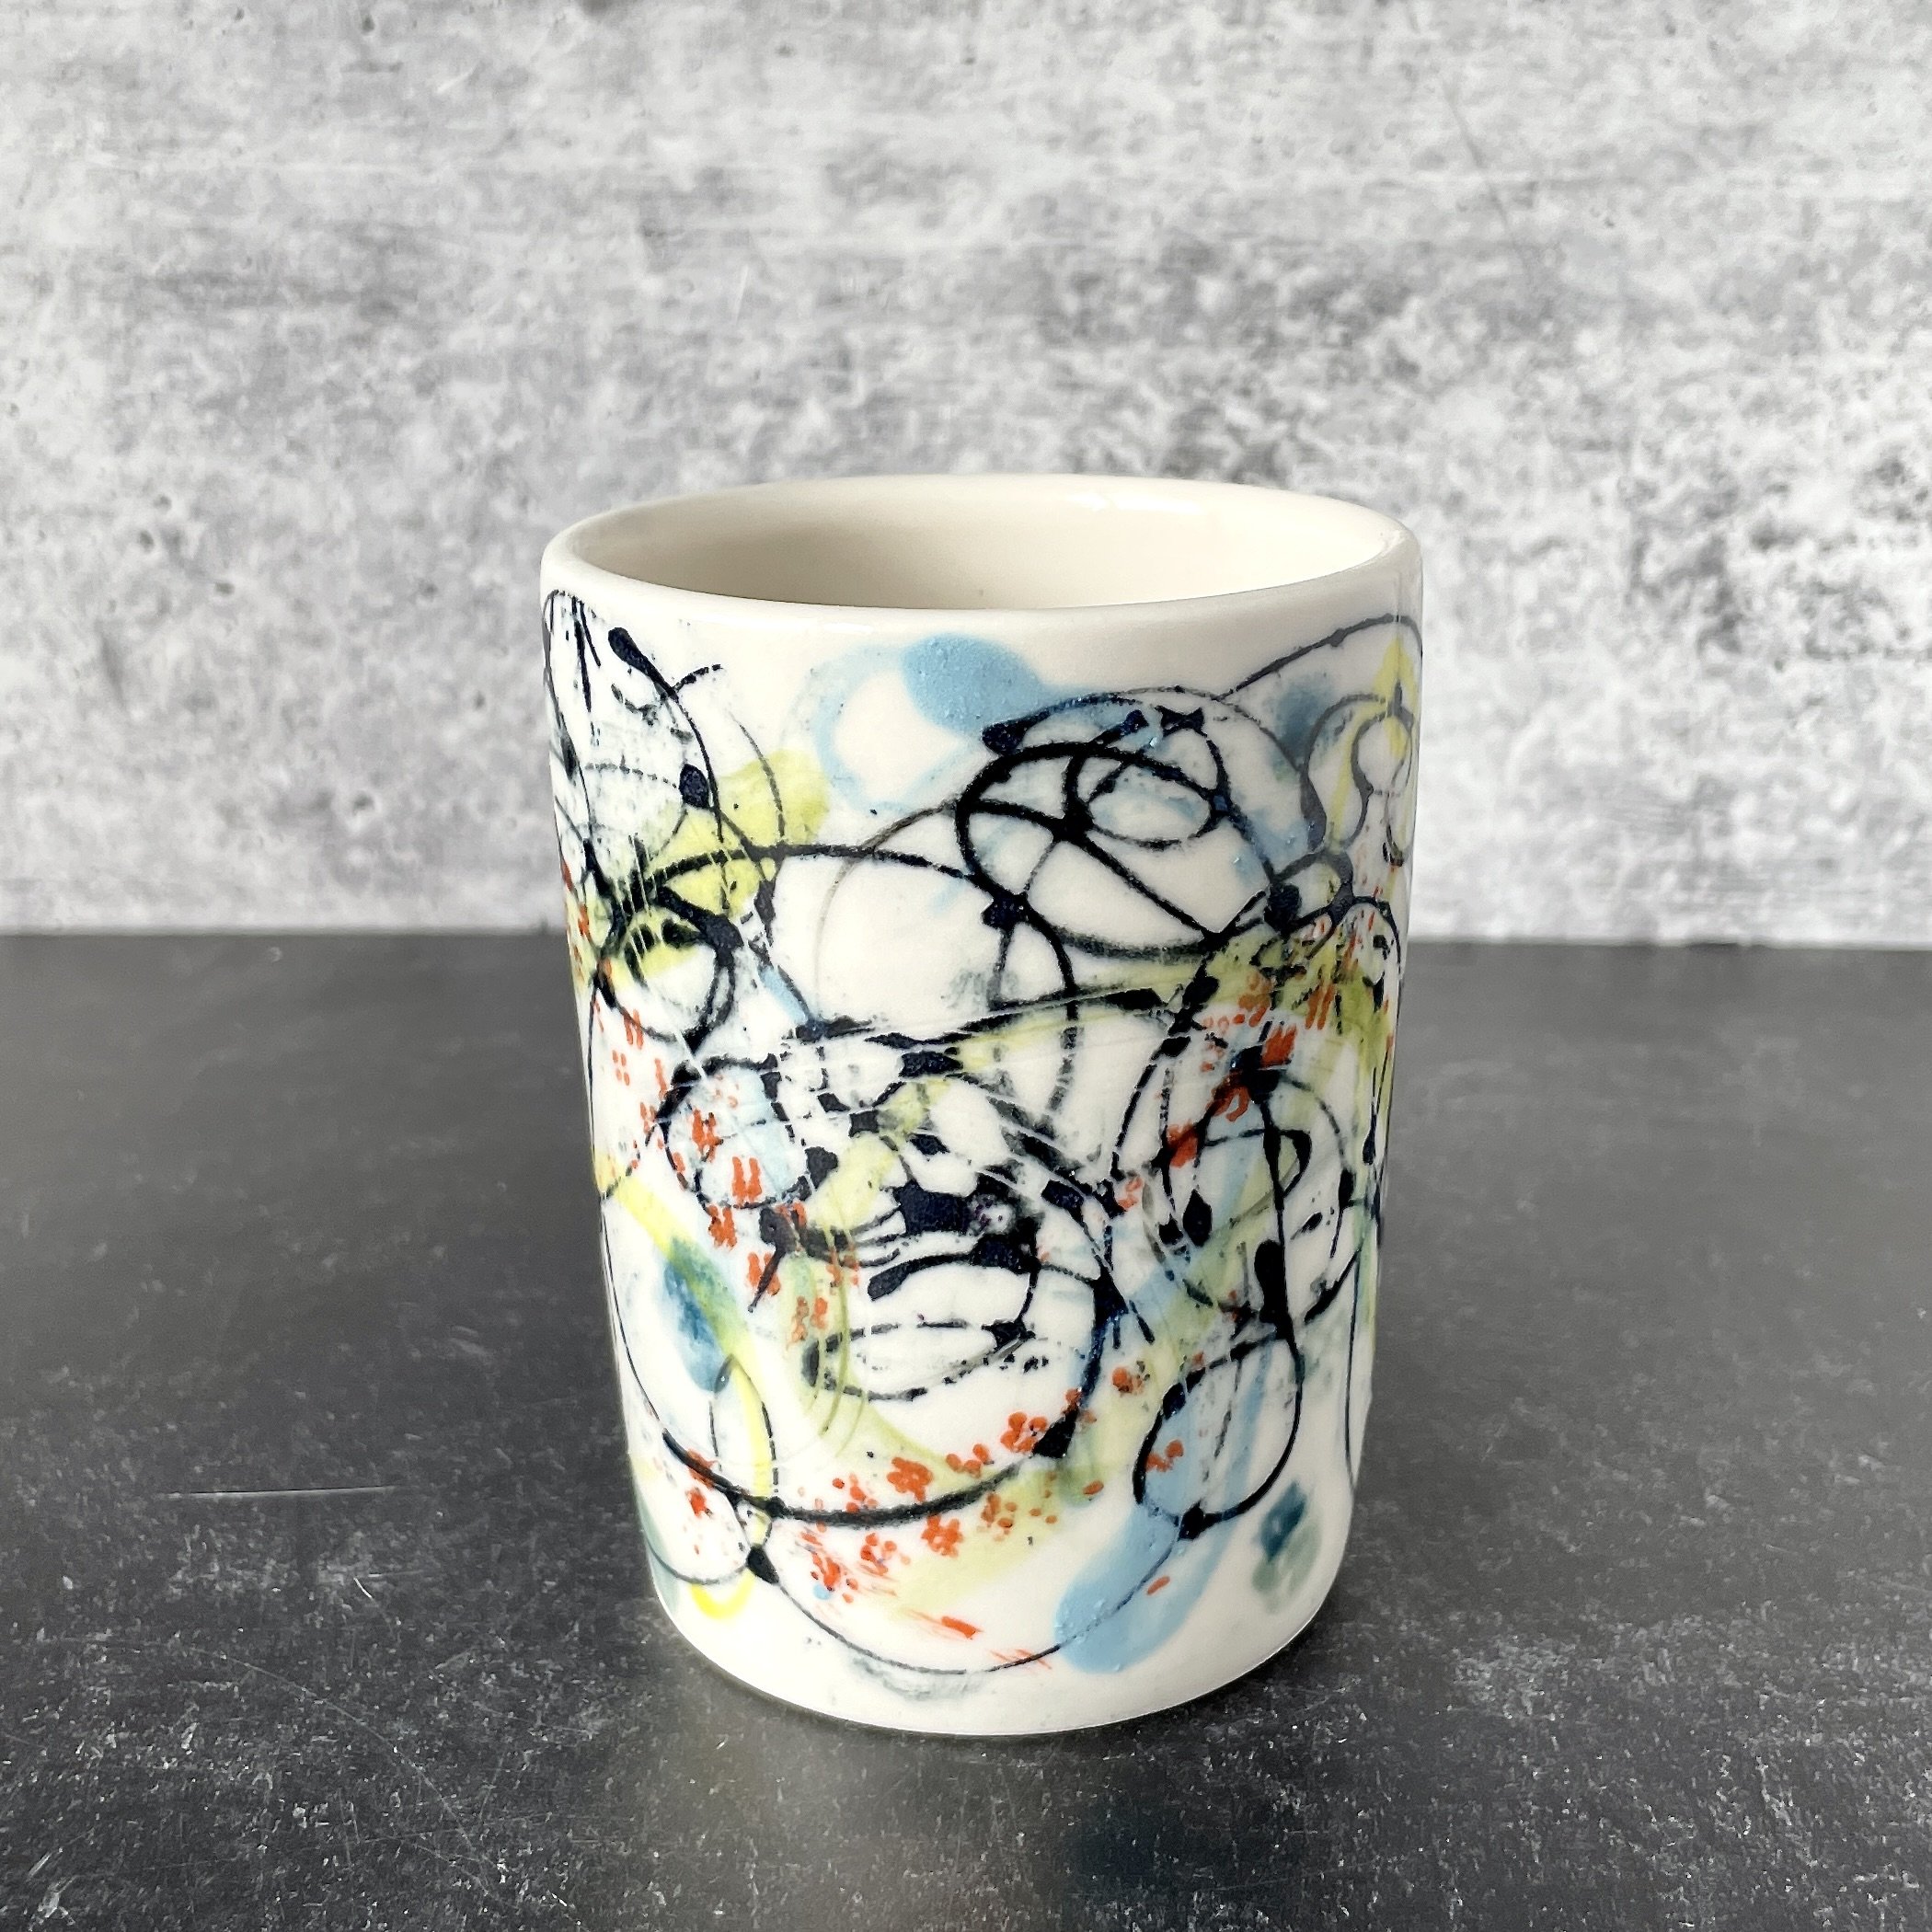 Translucent Porcelain Cup with Fun Graphic Design